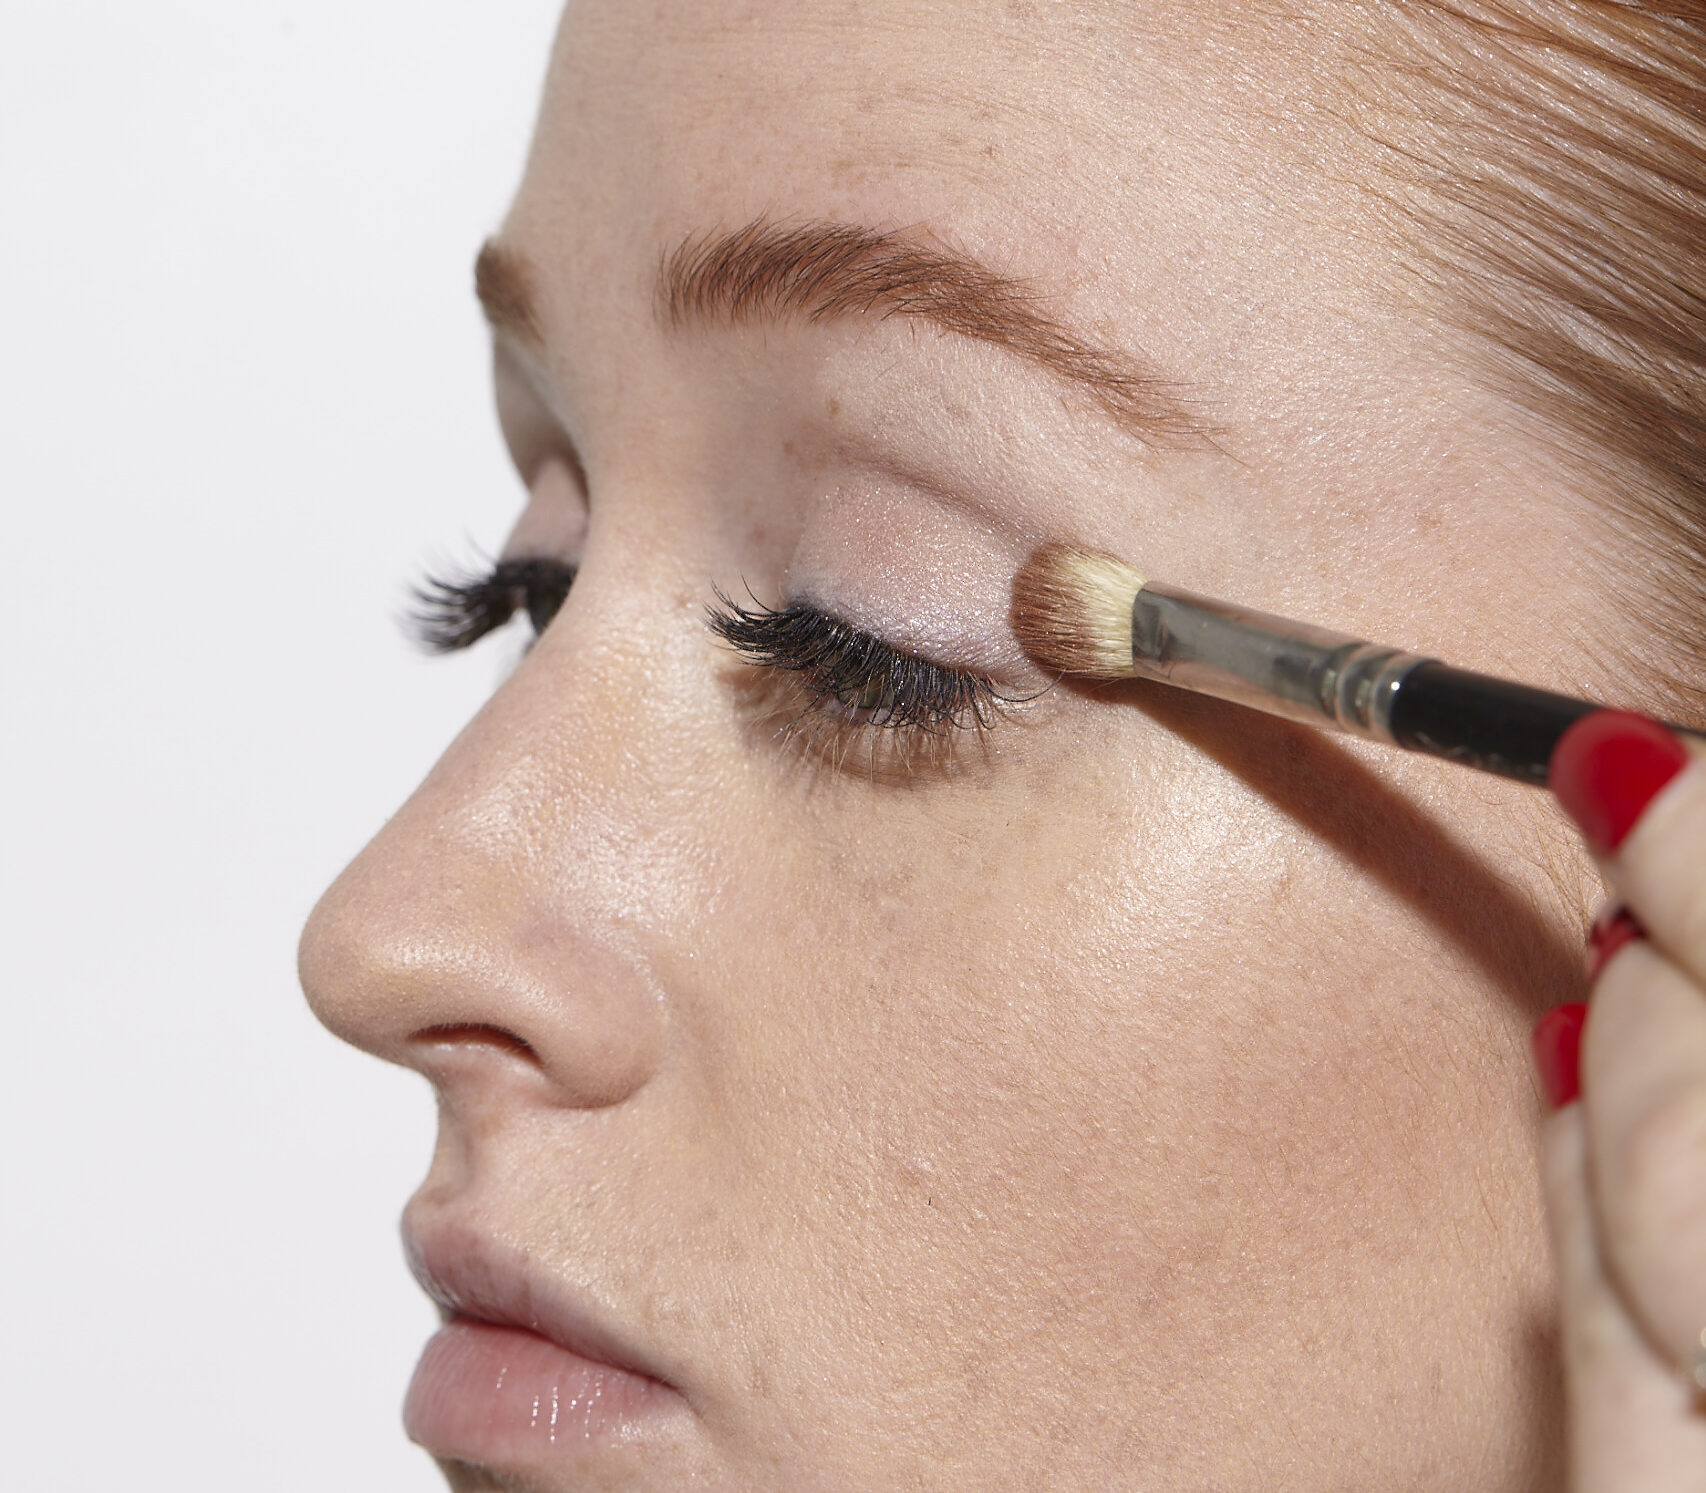 Sponges vs. Makeup Brushes: Which One Should Redheads Use?